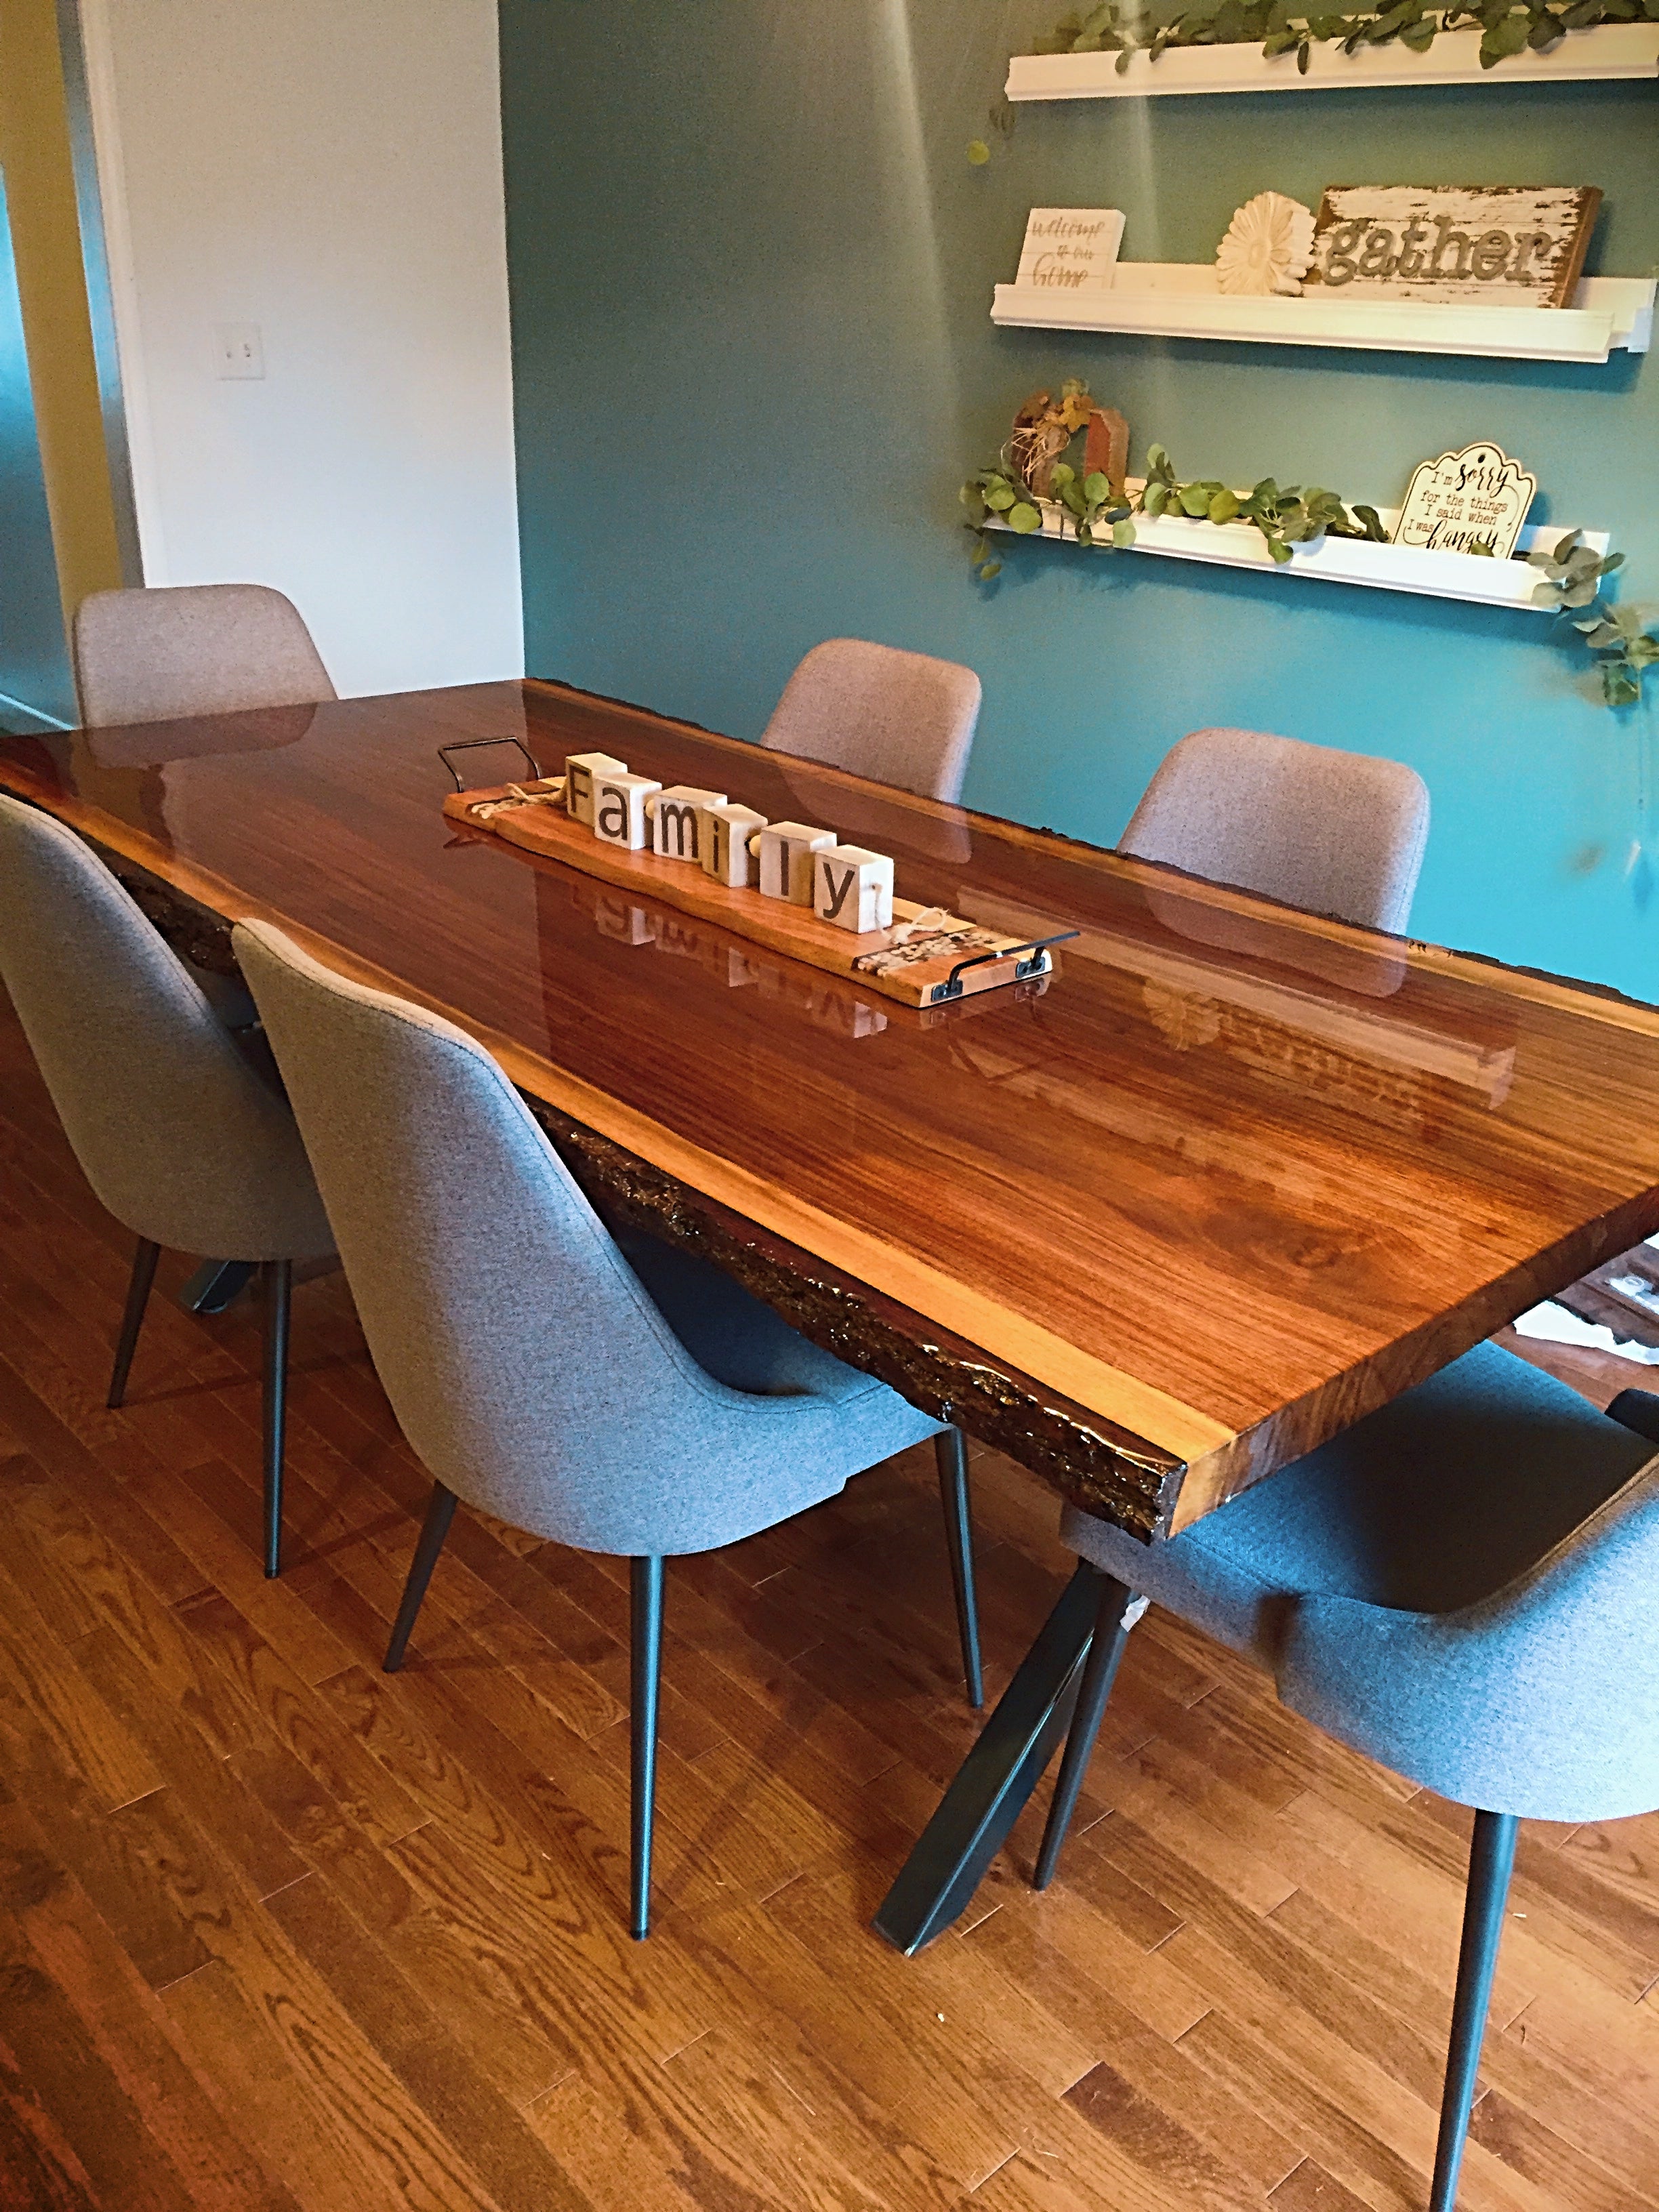 4 Tips to Properly Maintain Your Wooden Epoxy Table